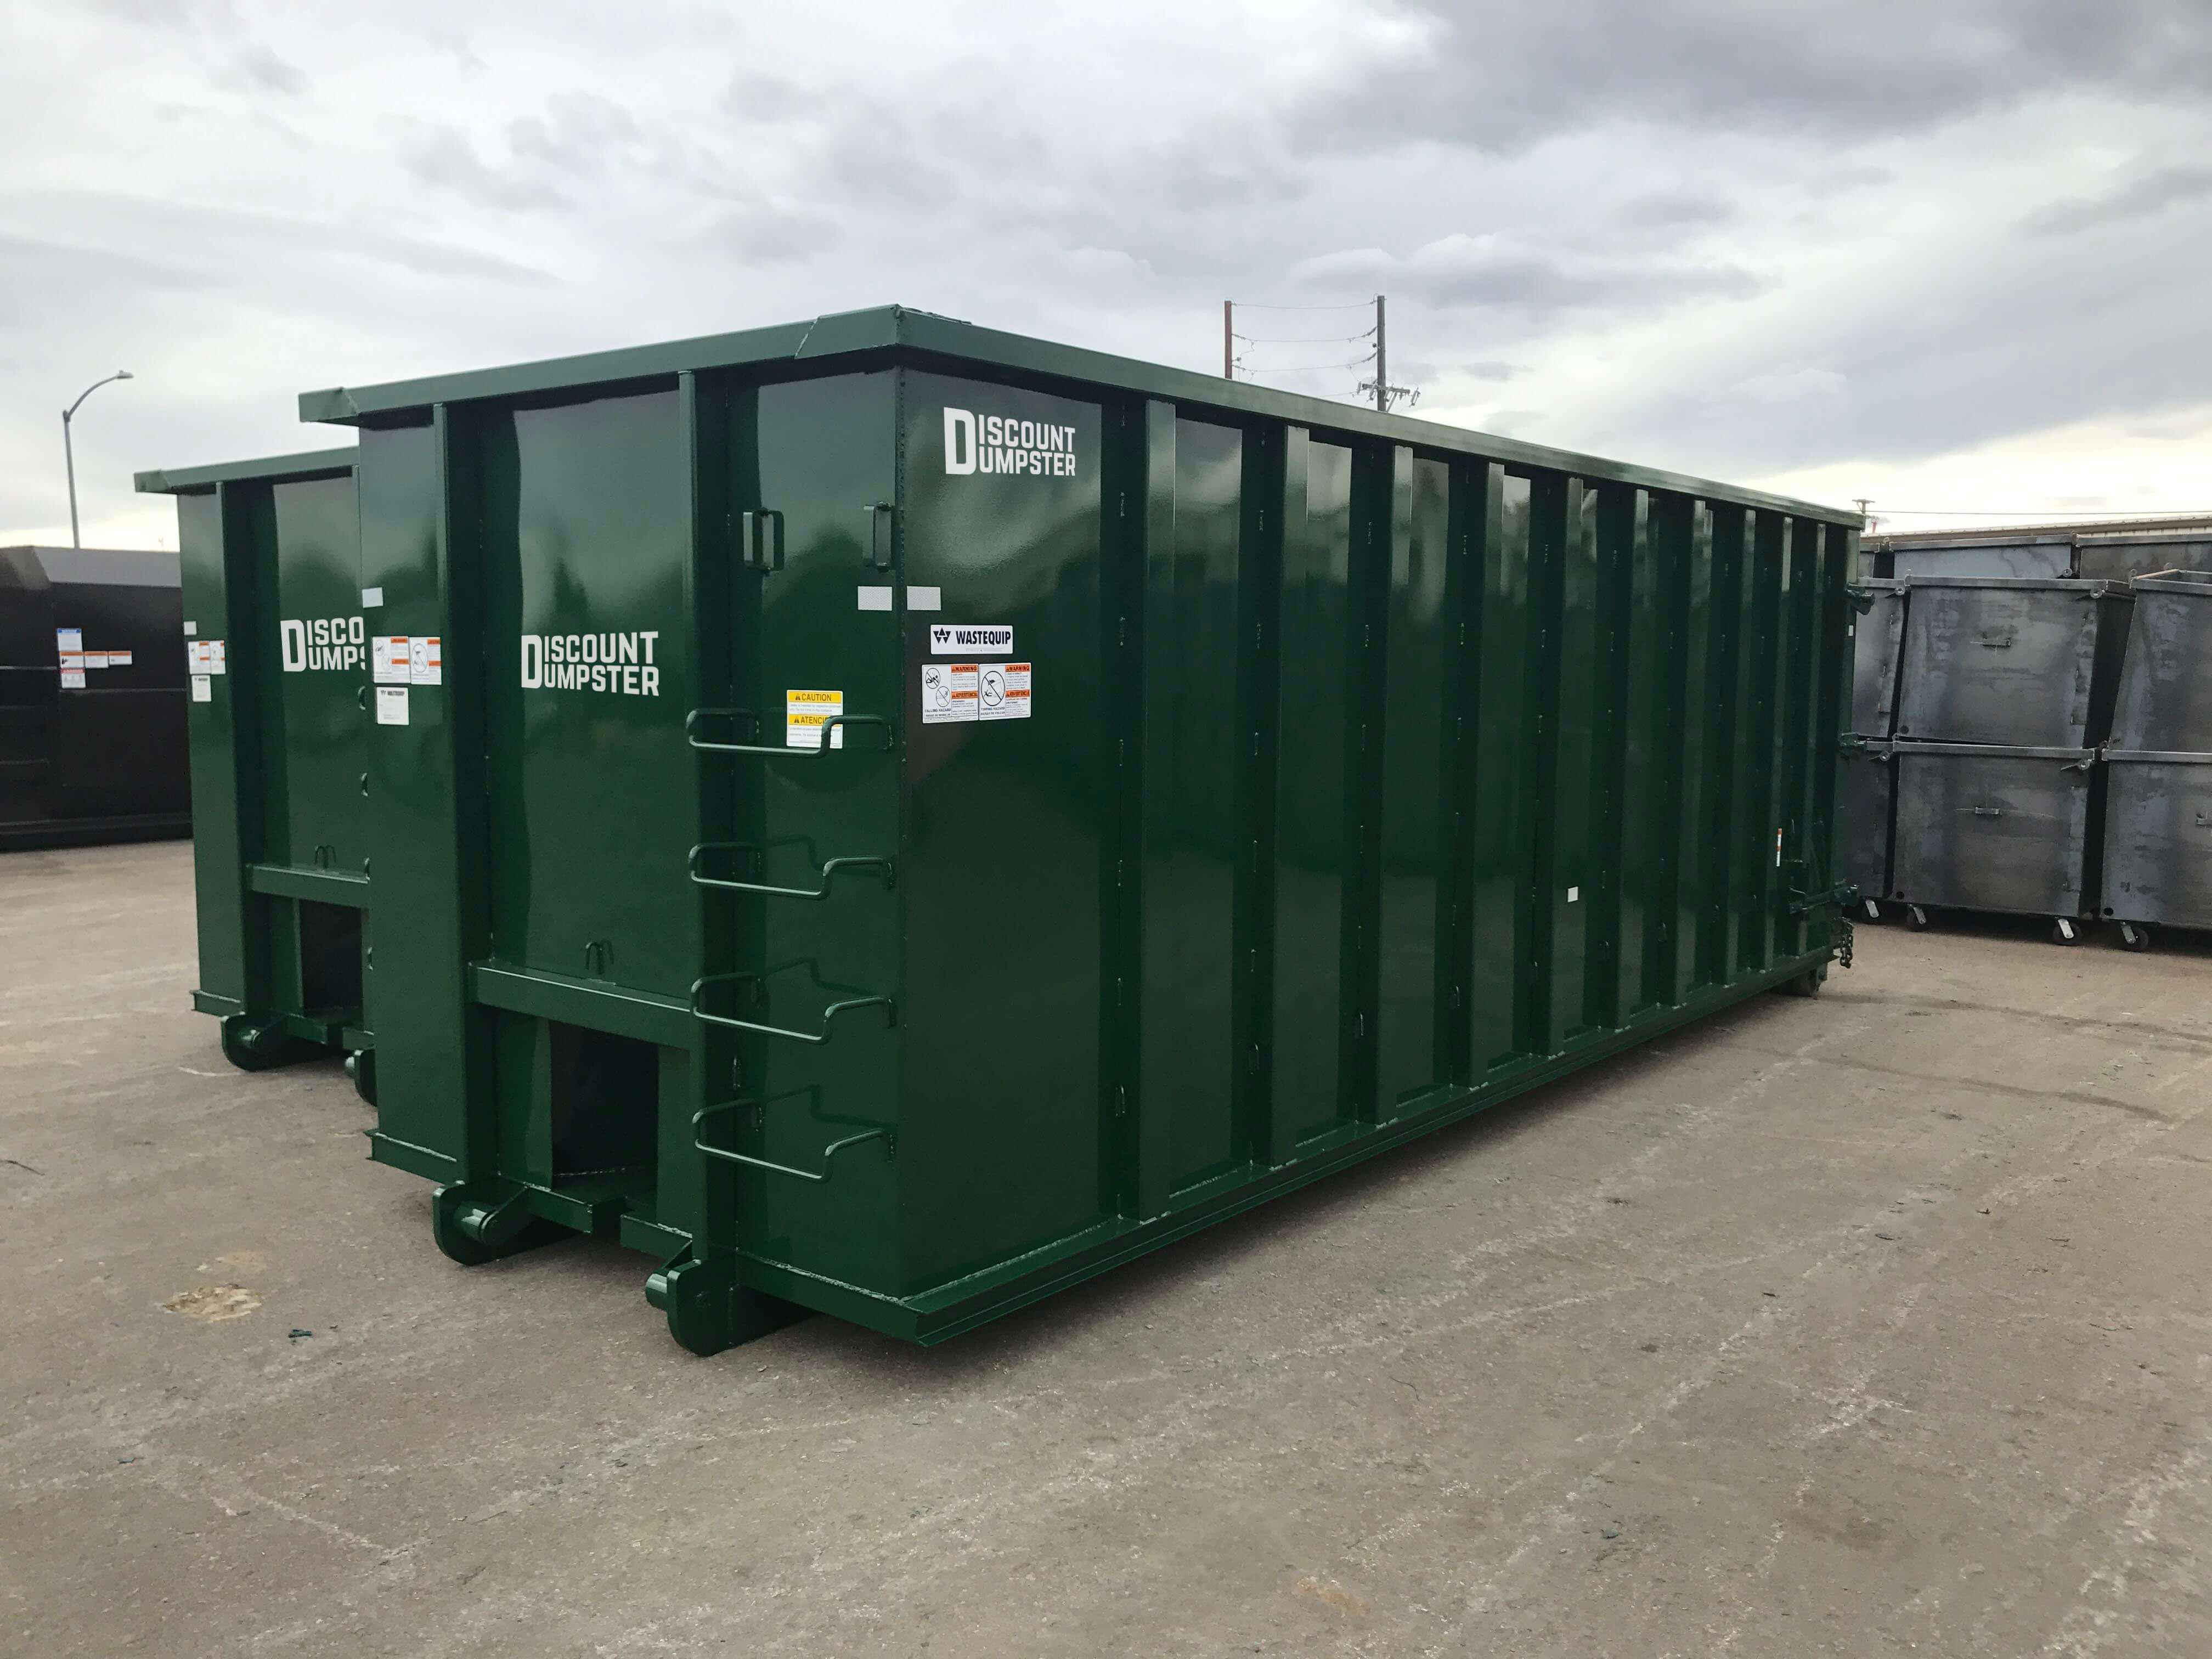 Discount dumpster has roll off dumpsters for chicago il Discount Dumpster Chicago (312)549-9198